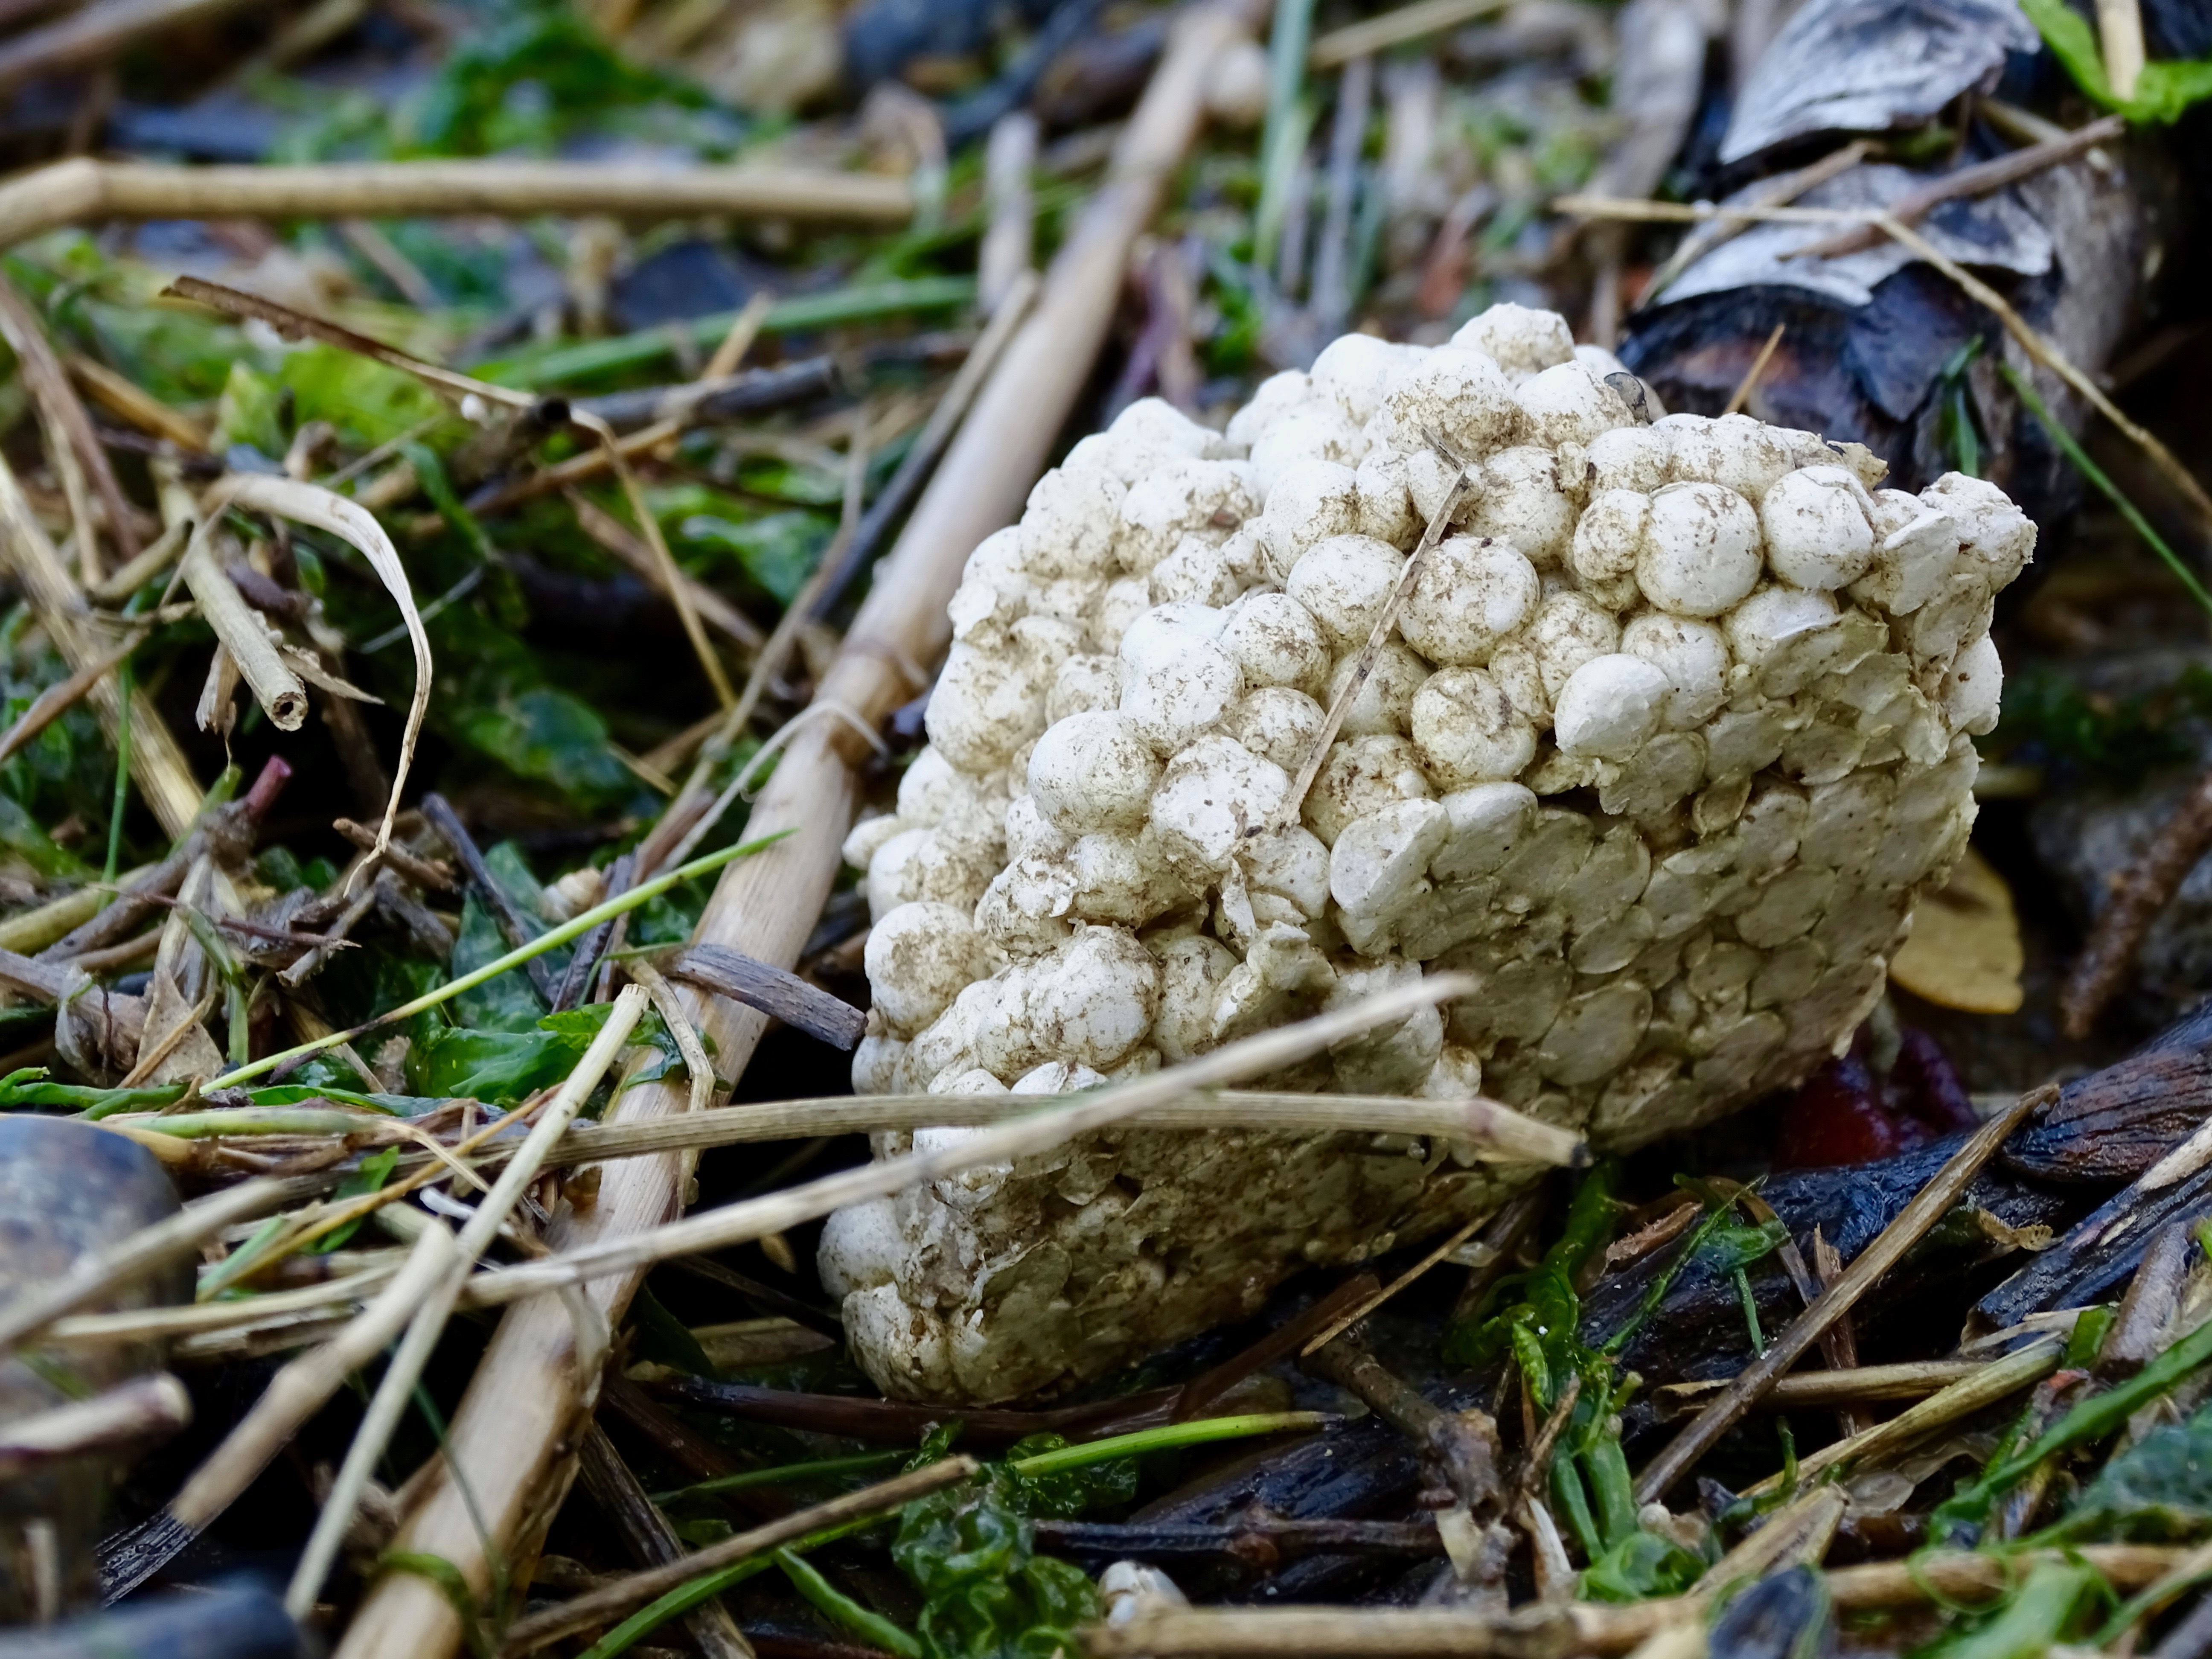 A chunk of expanded polystyrene left on the ground, with dirt lining the small foam balls as a sign of its long time in the elements.